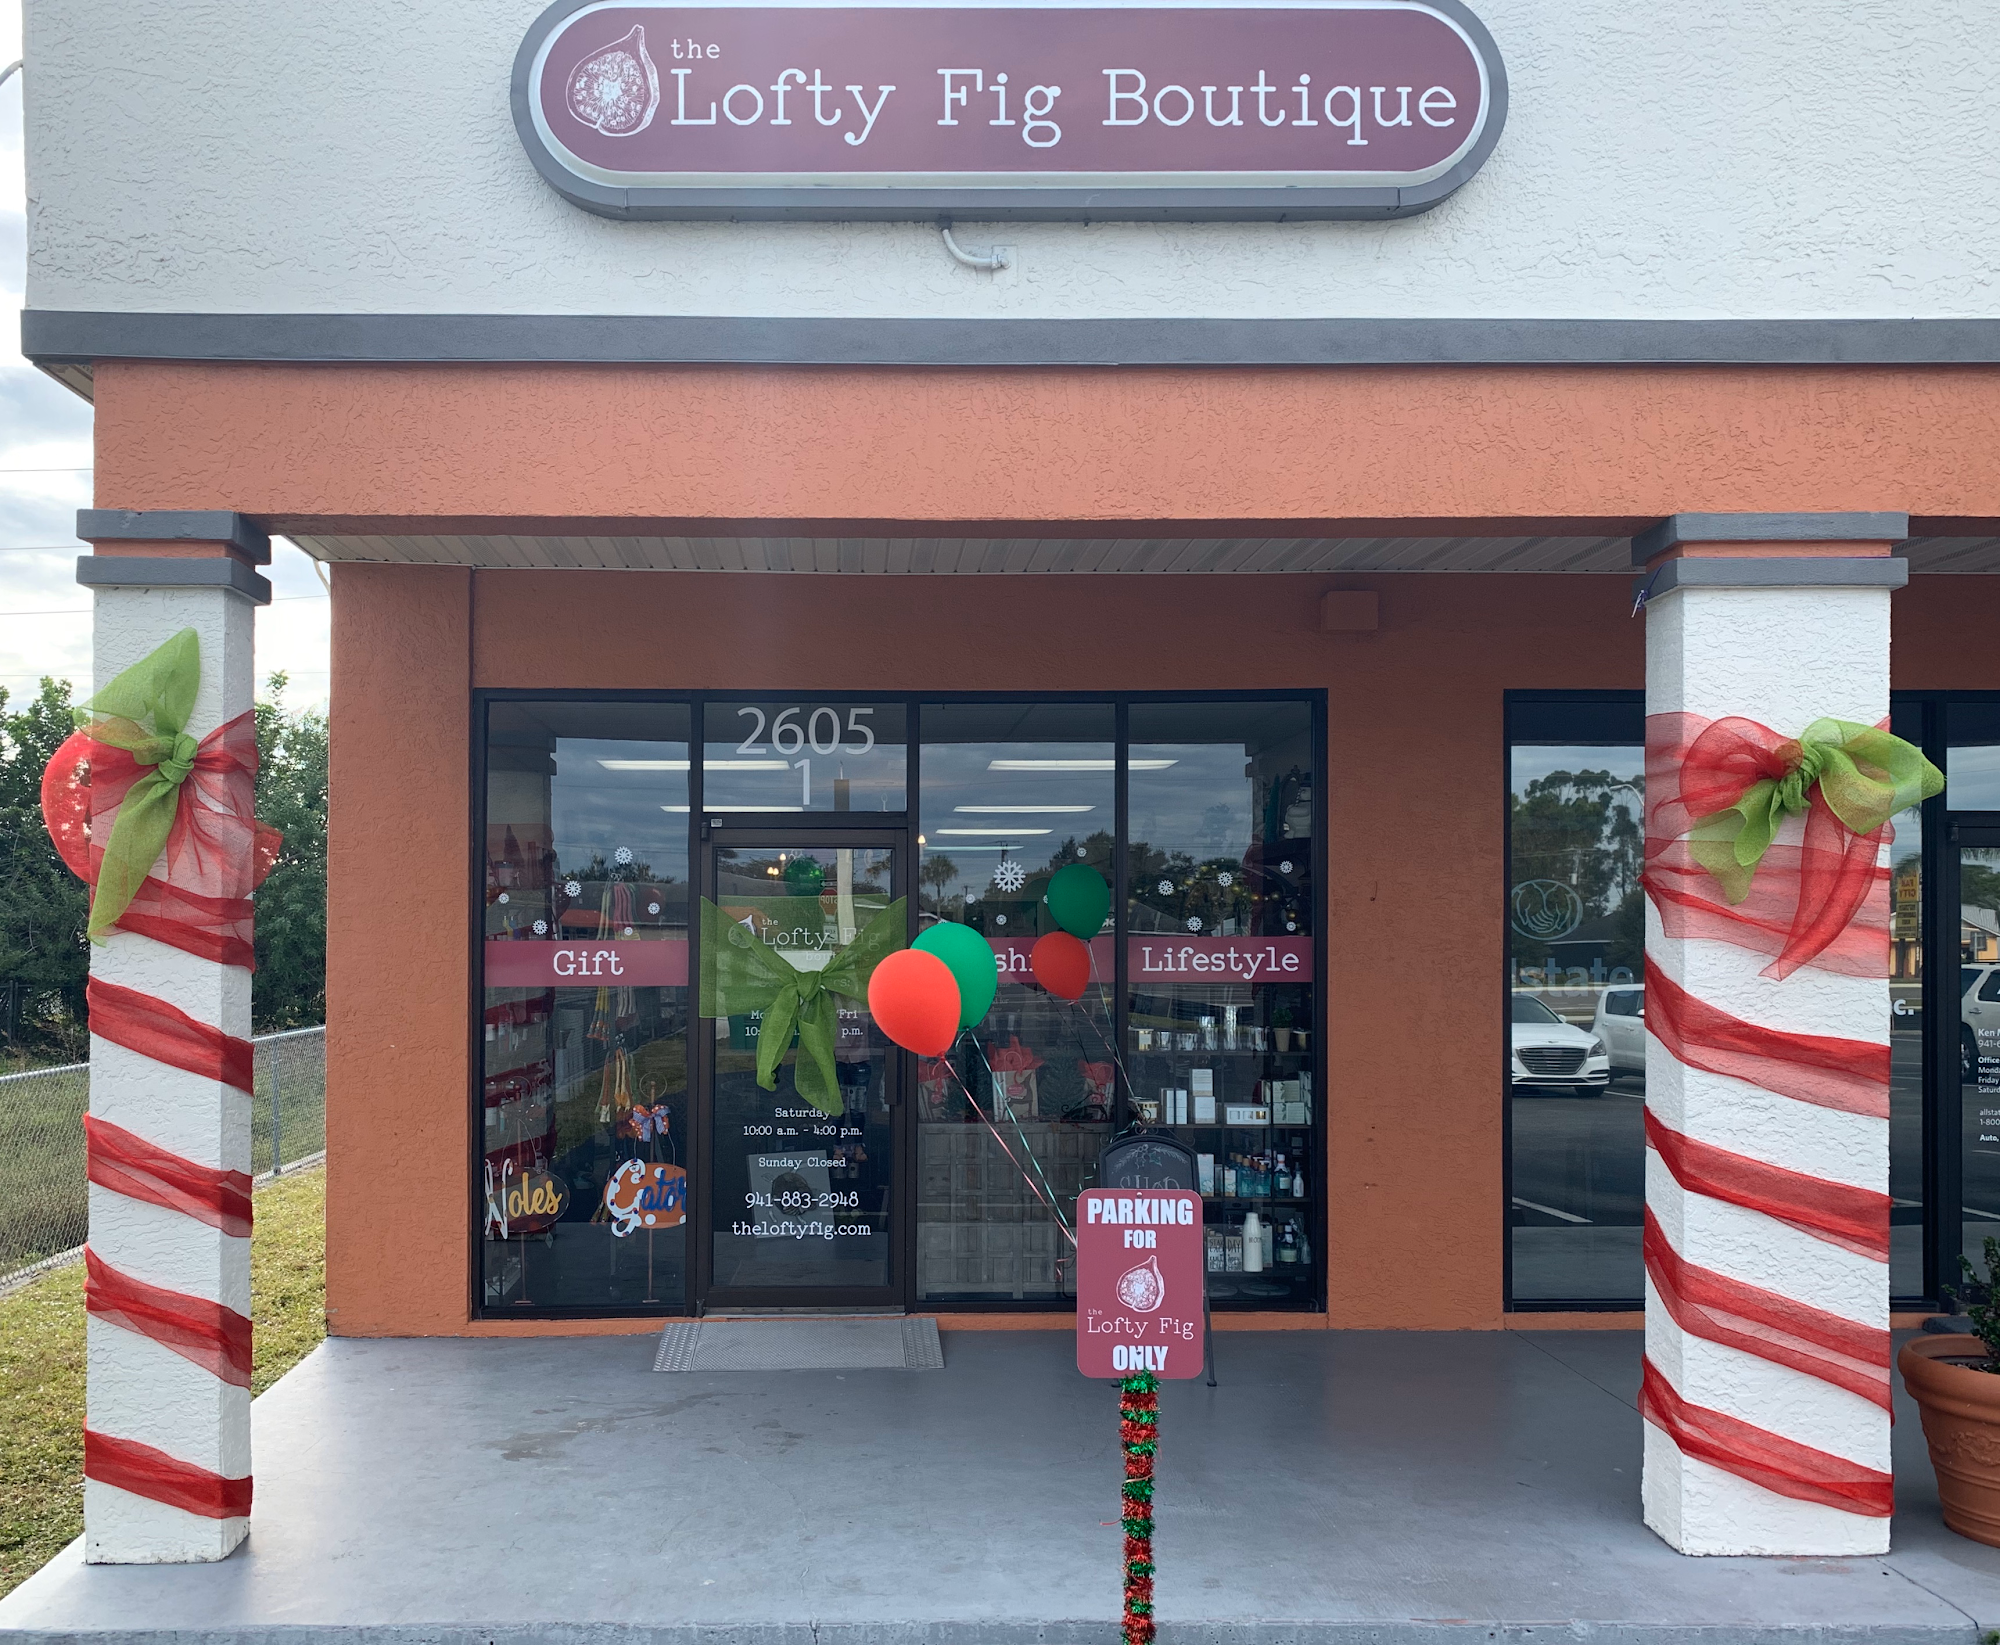 The Lofty Fig Boutique